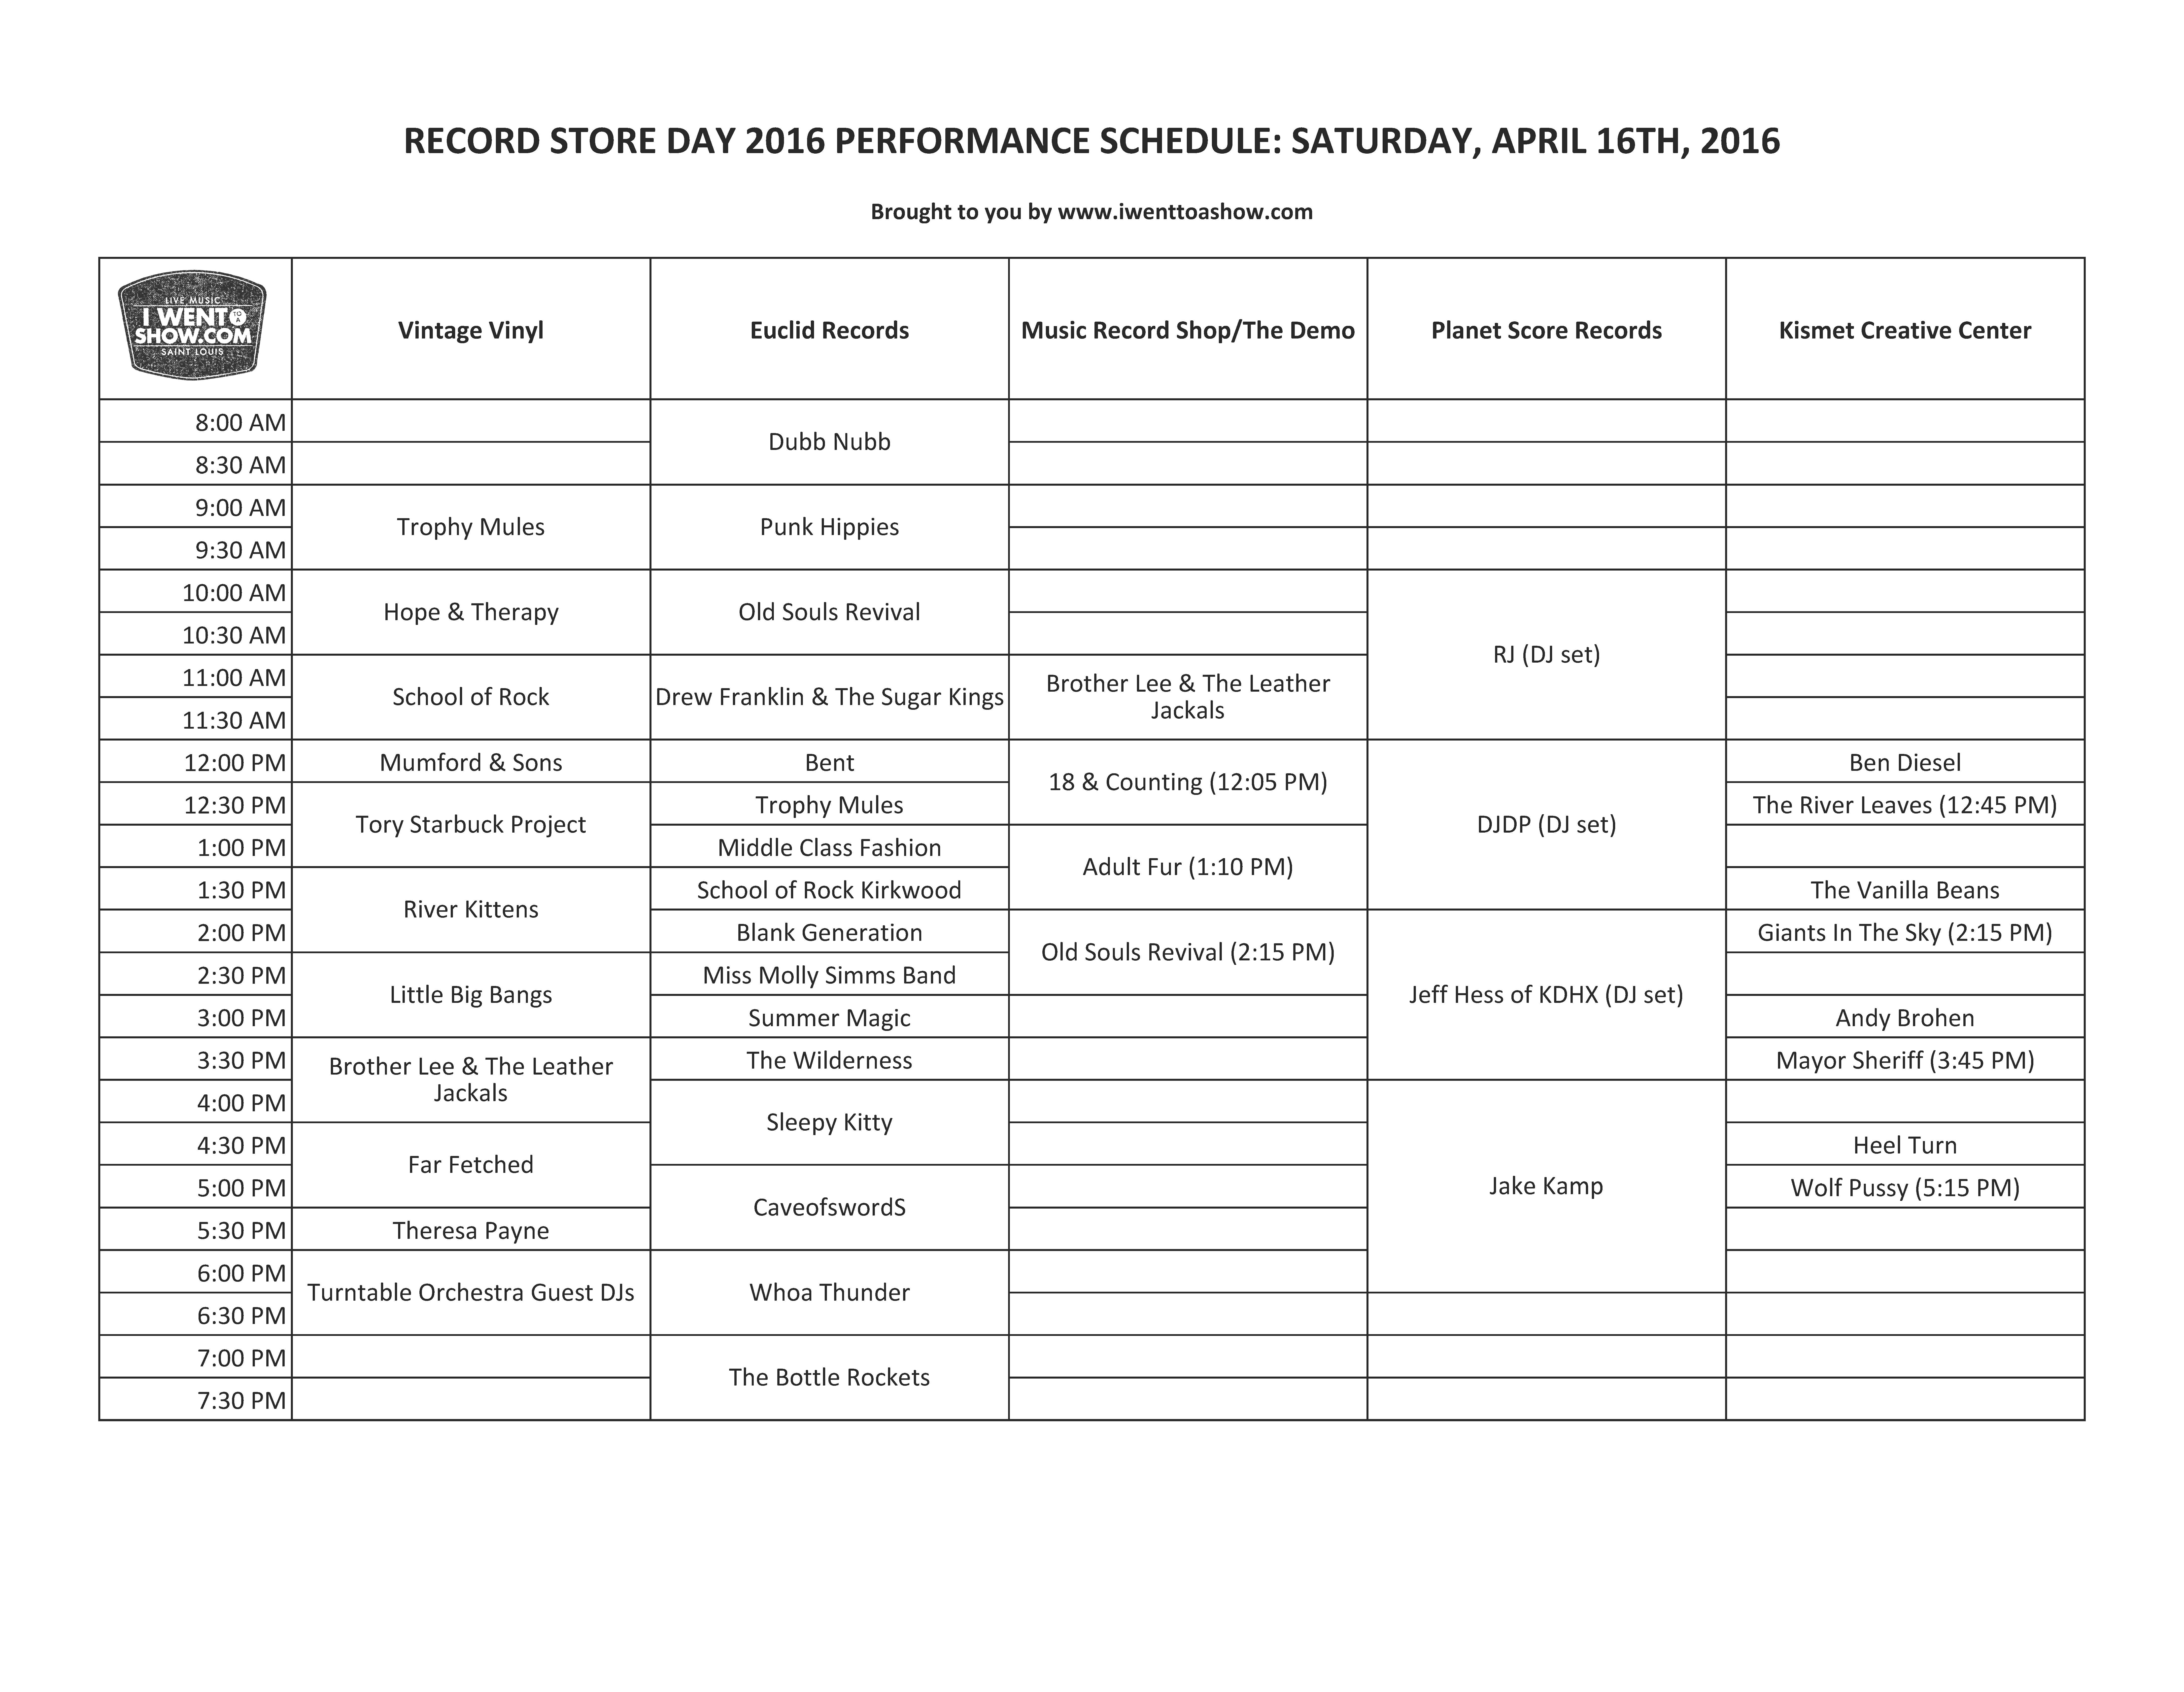 RECORD STORE DAY 2016 A Printable St Louis Performance Schedule I